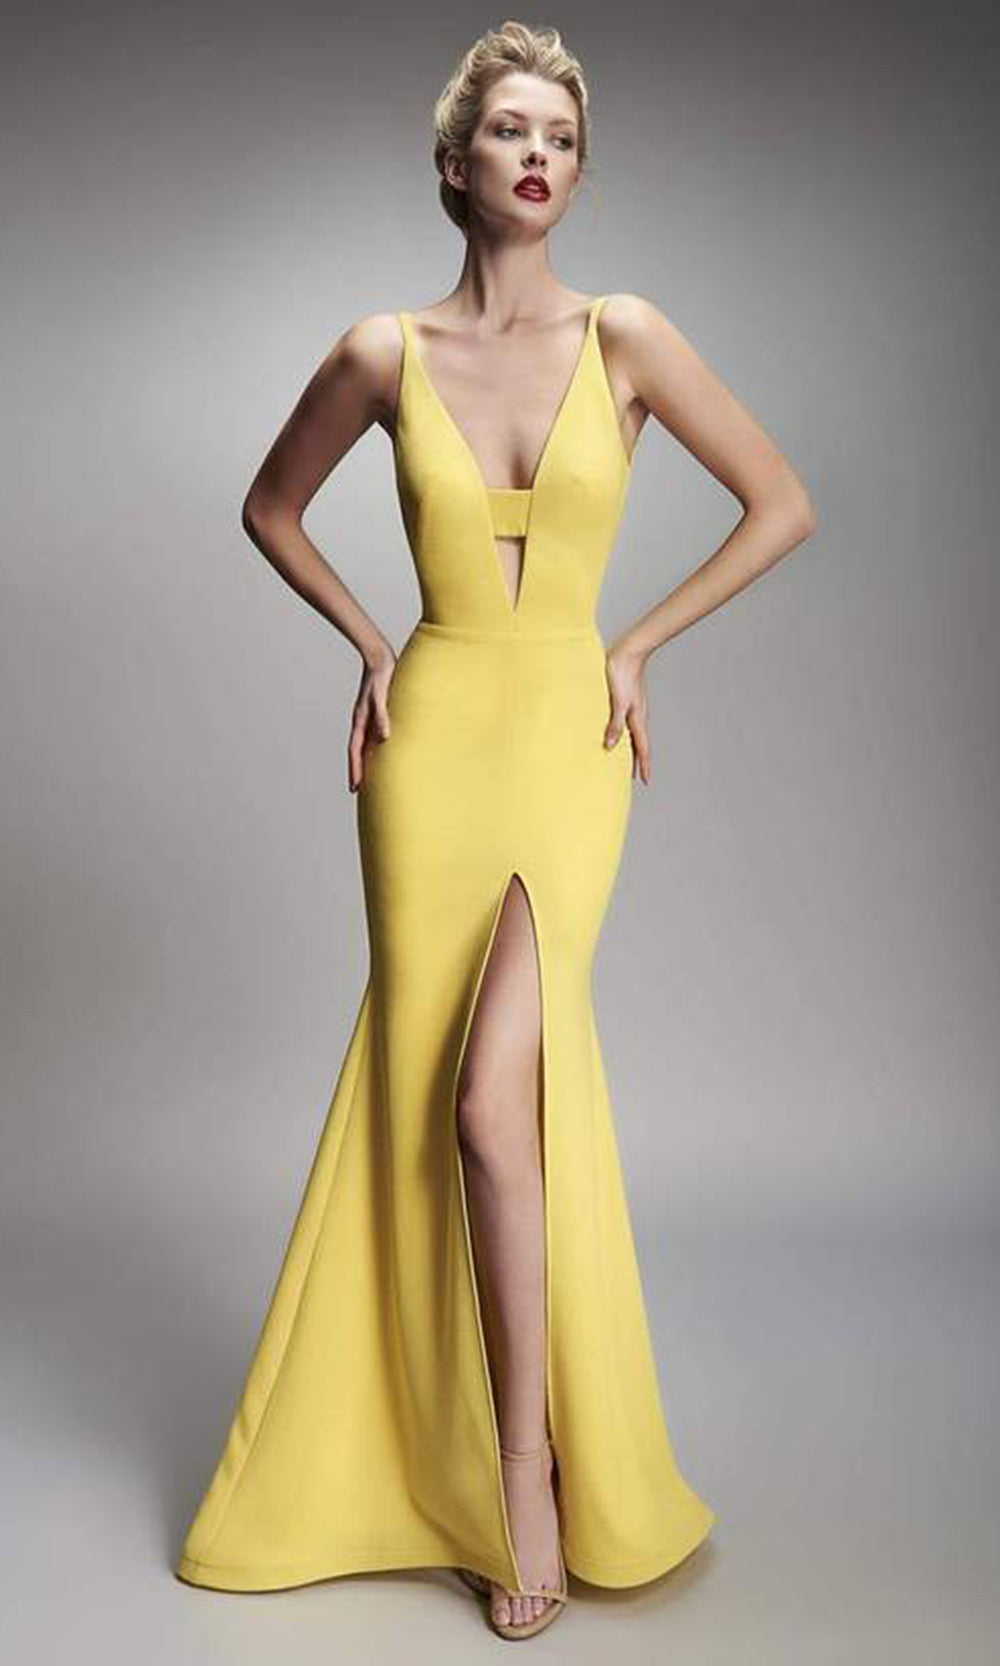 Nicole Bakti - Cutout Ornate High Slit Long Gown  In Yellow